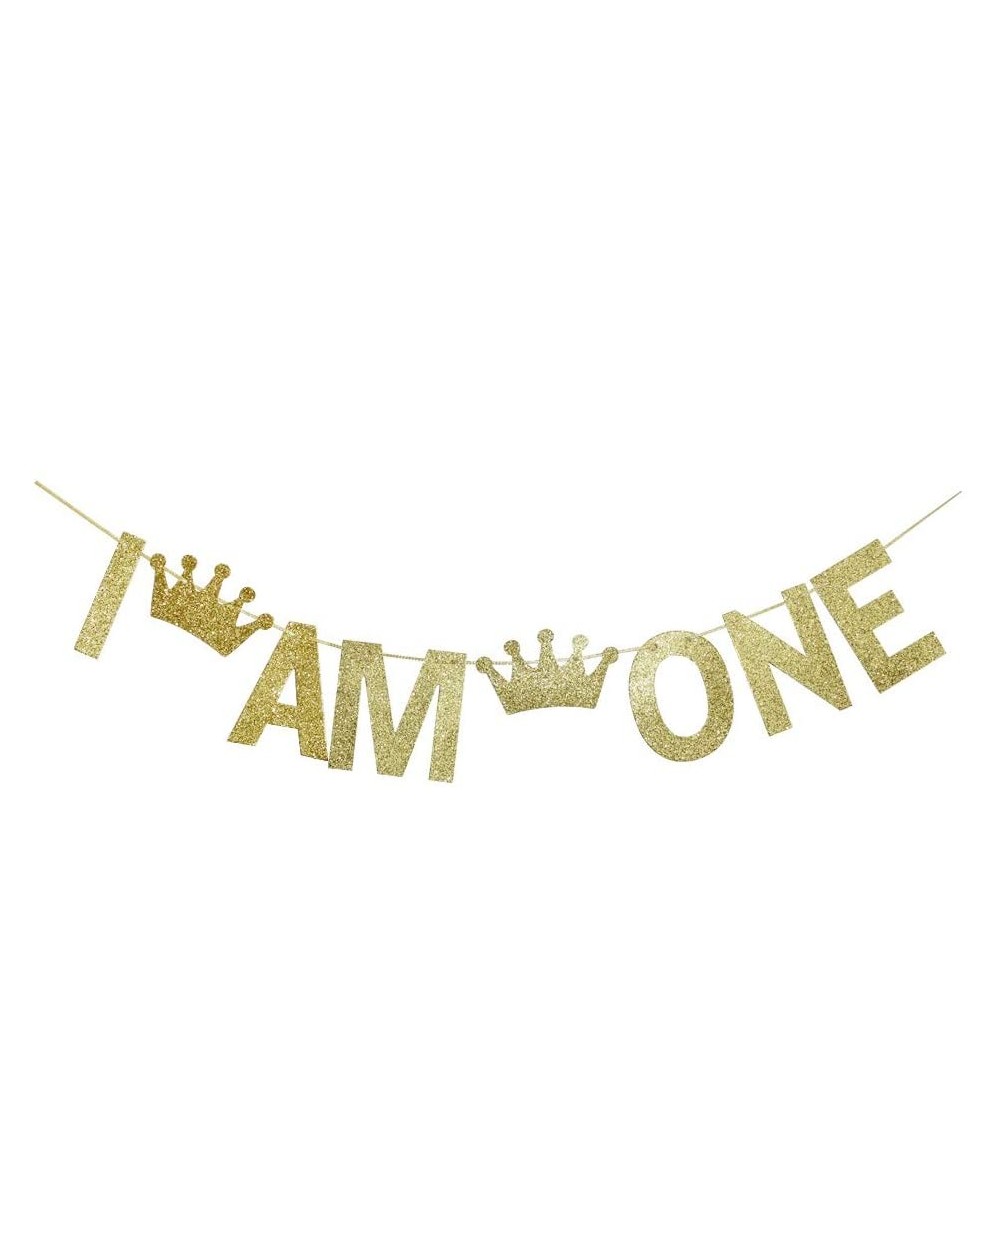 Banners & Garlands I Am One Gold Glitter Banner for Baby's First Birthday Party Sign Decorations- Baby's 1st Birthday Party S...